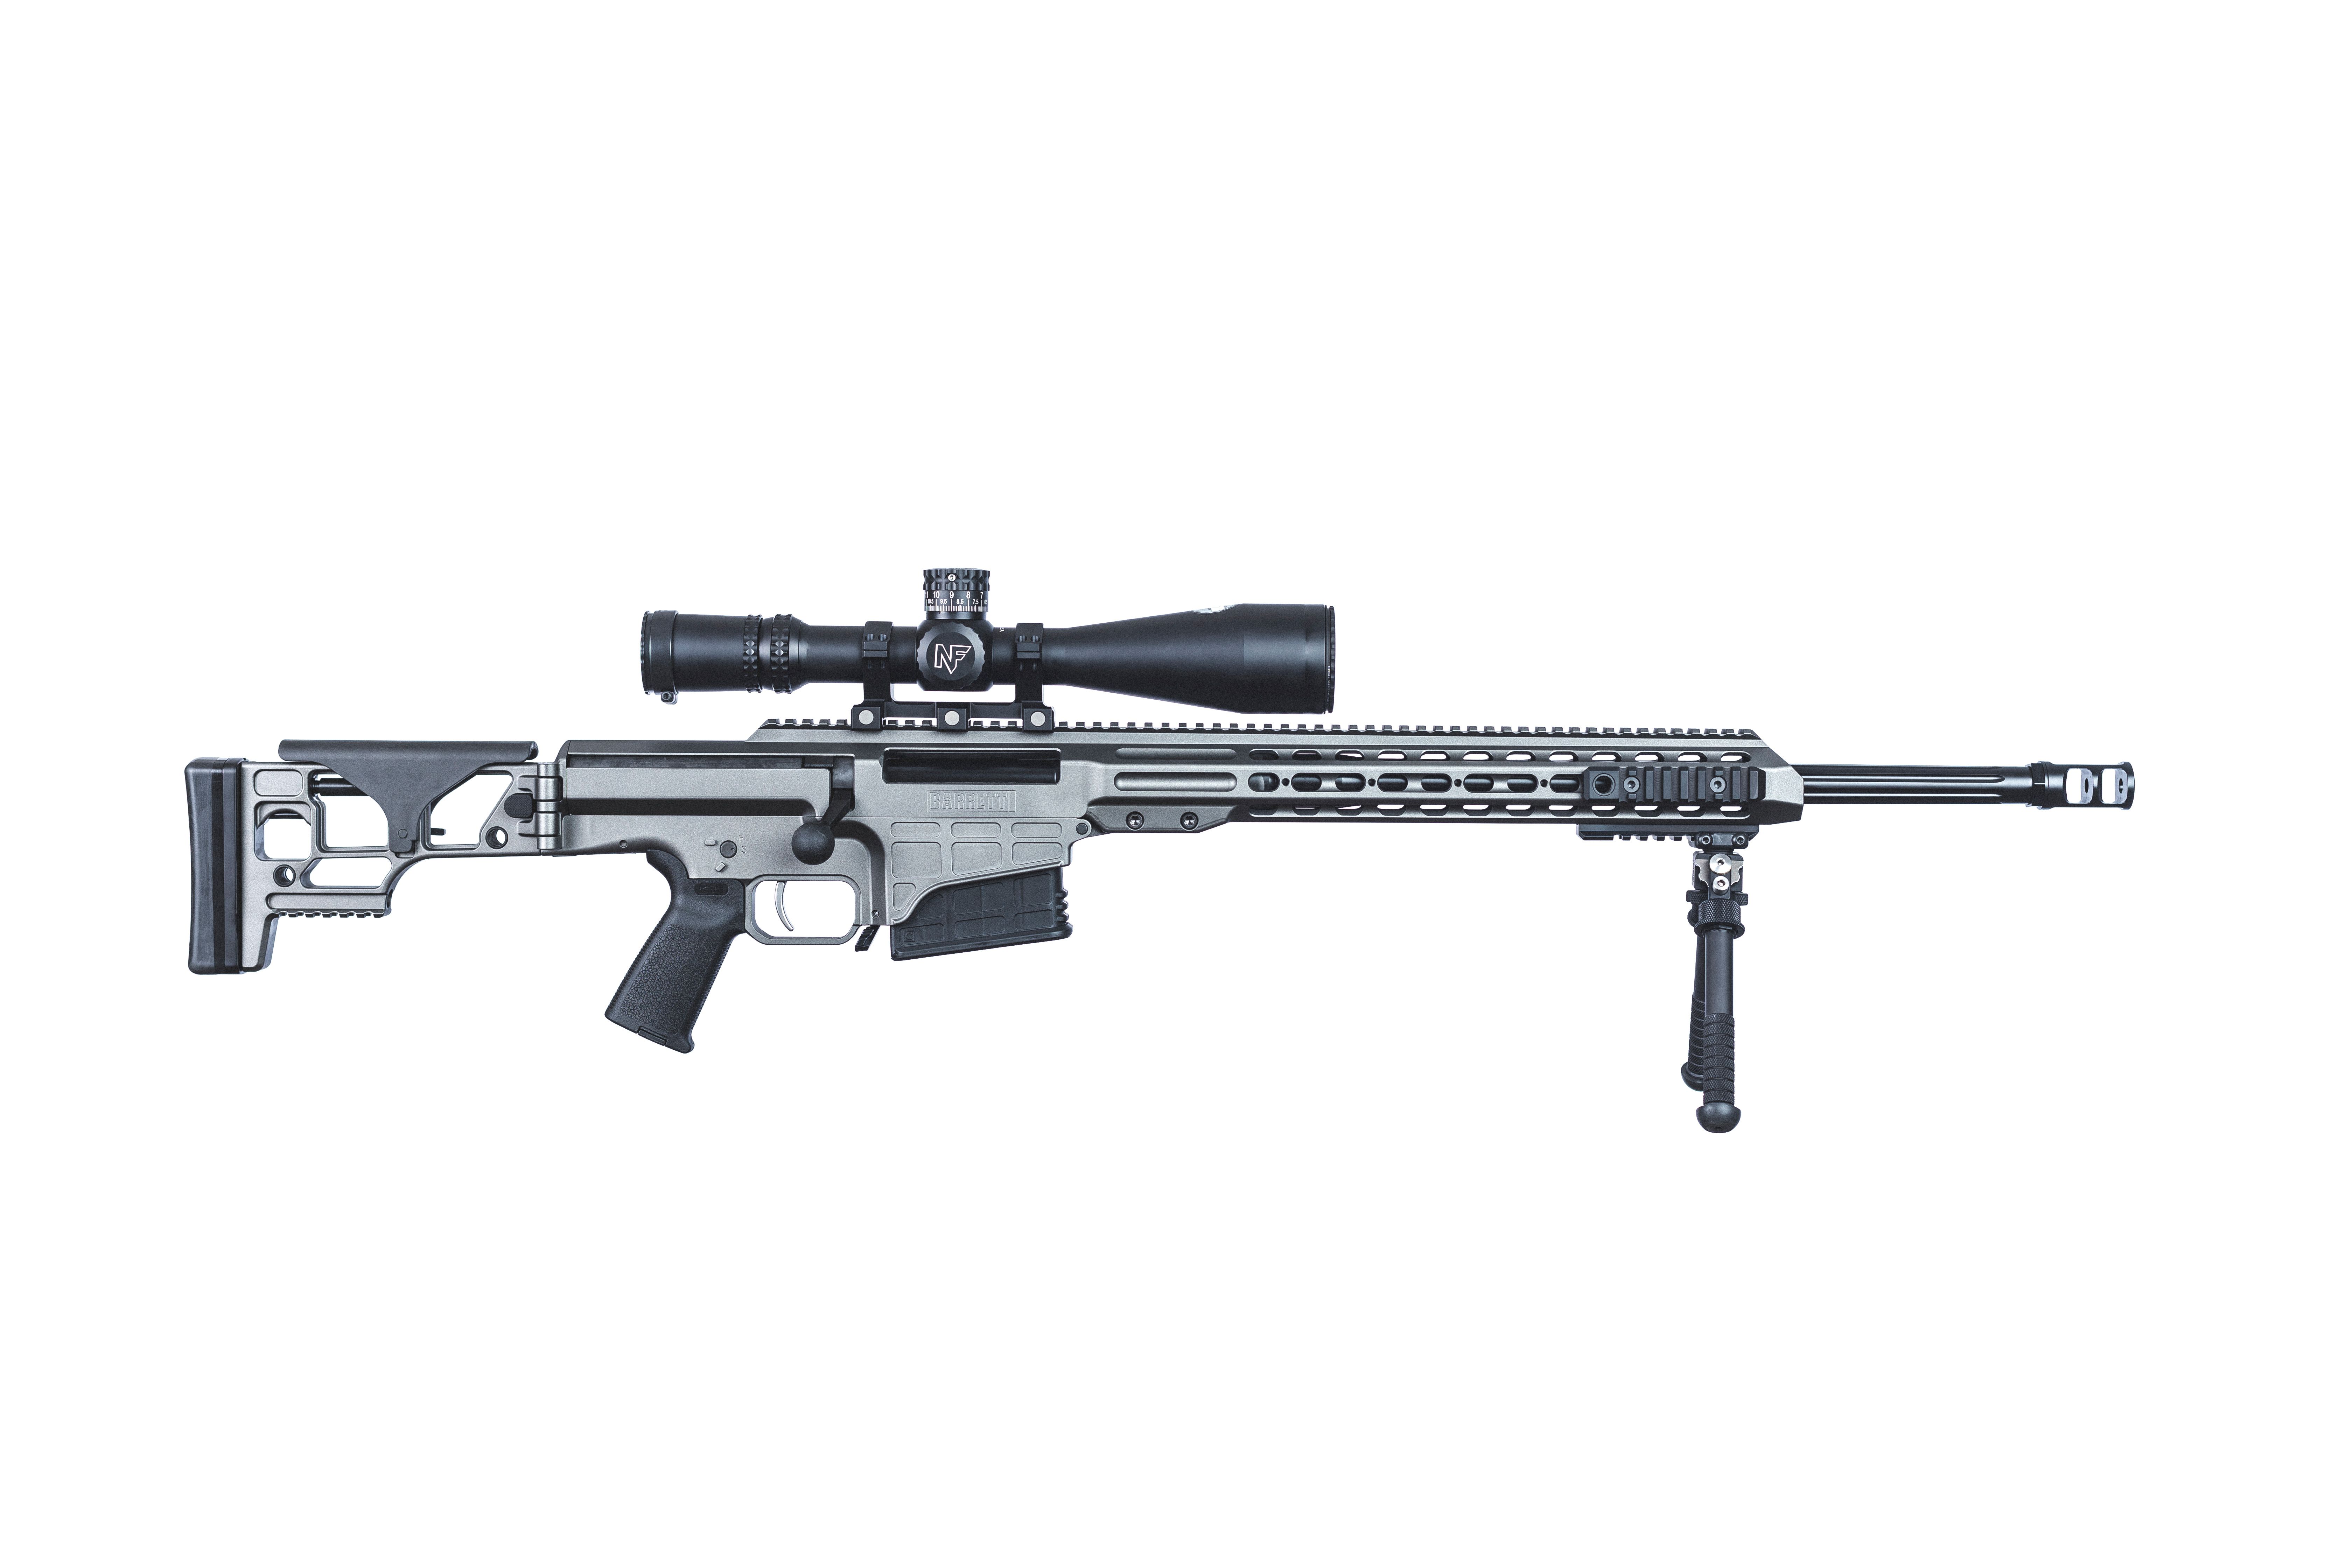 Special ops snipers will soon shoot this new rifle that can fire three  different calibers